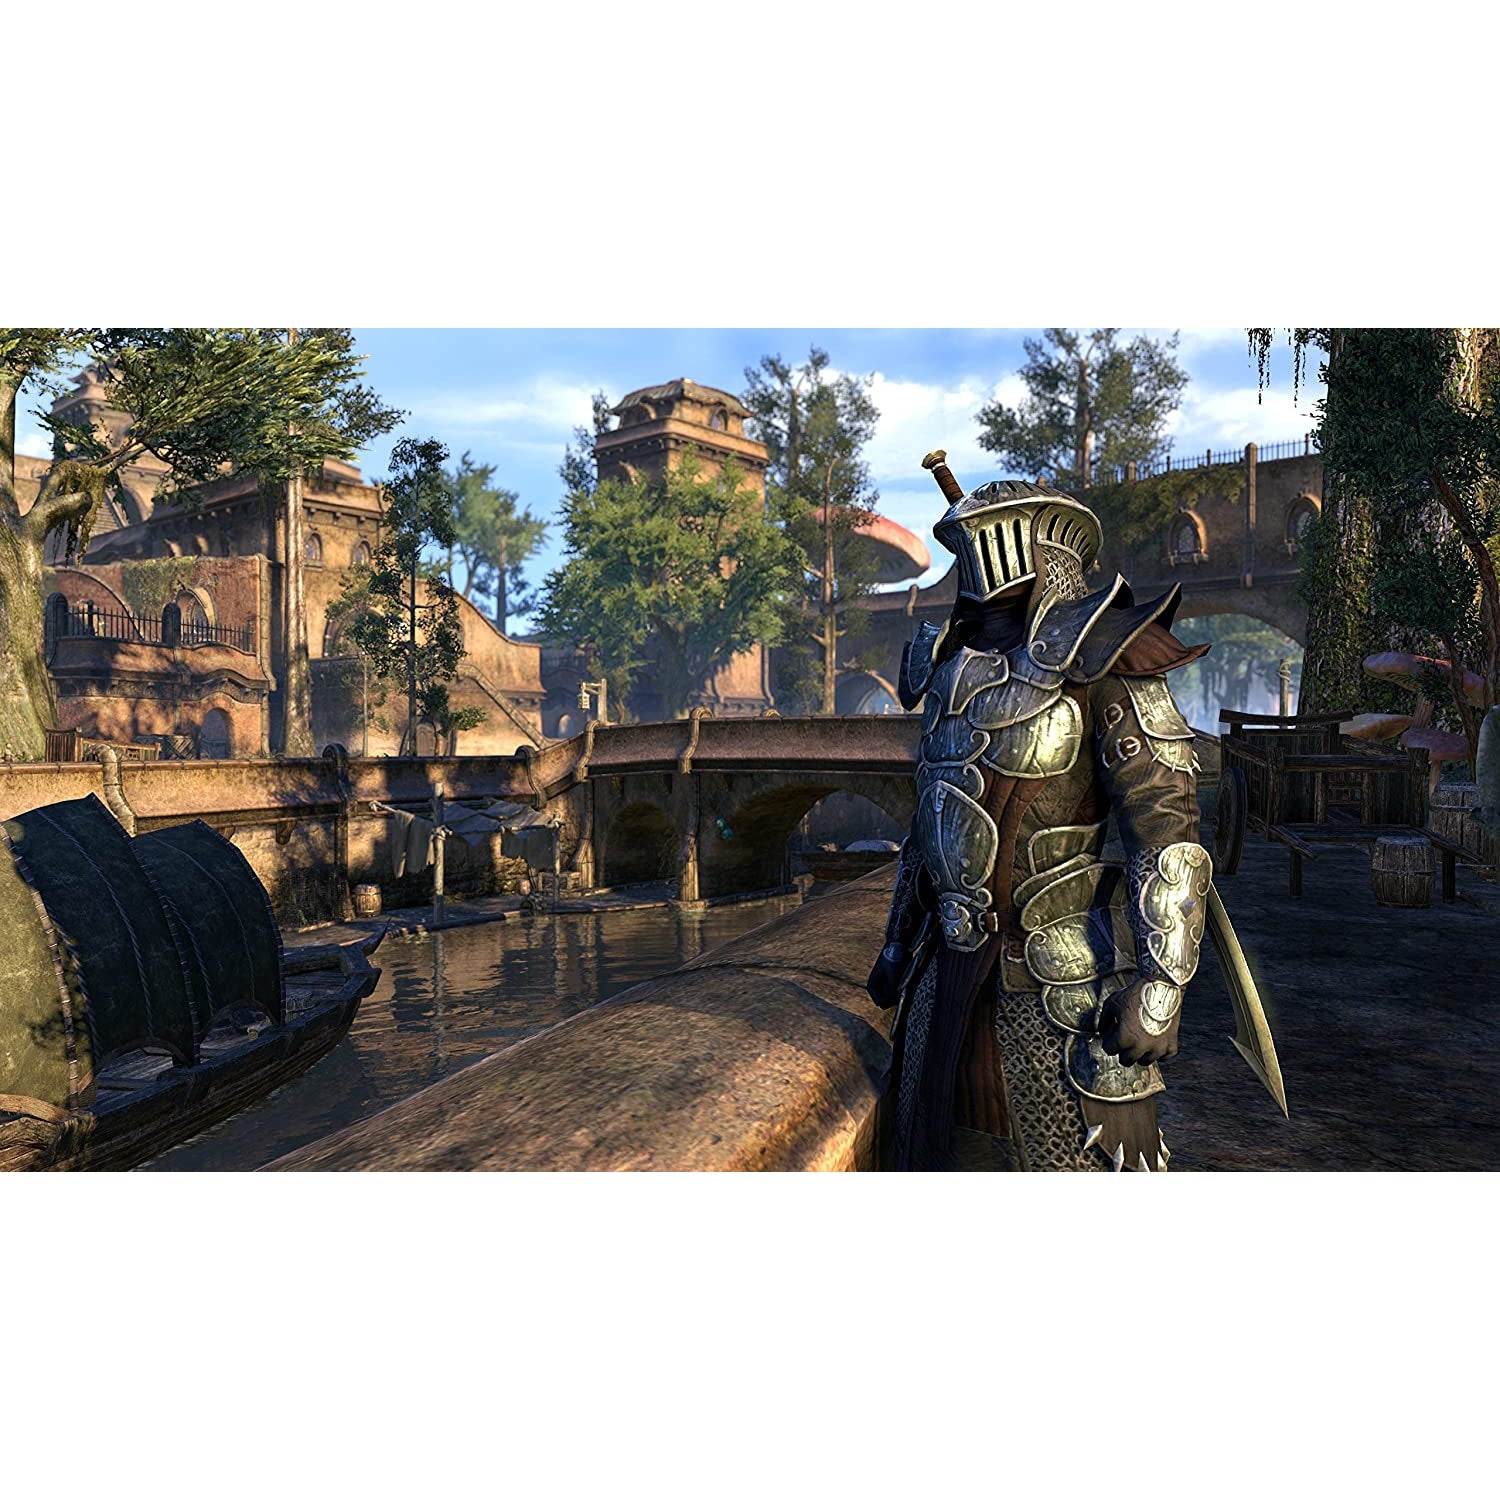 The Elder Scrolls Online And Morrowind (Xbox One)